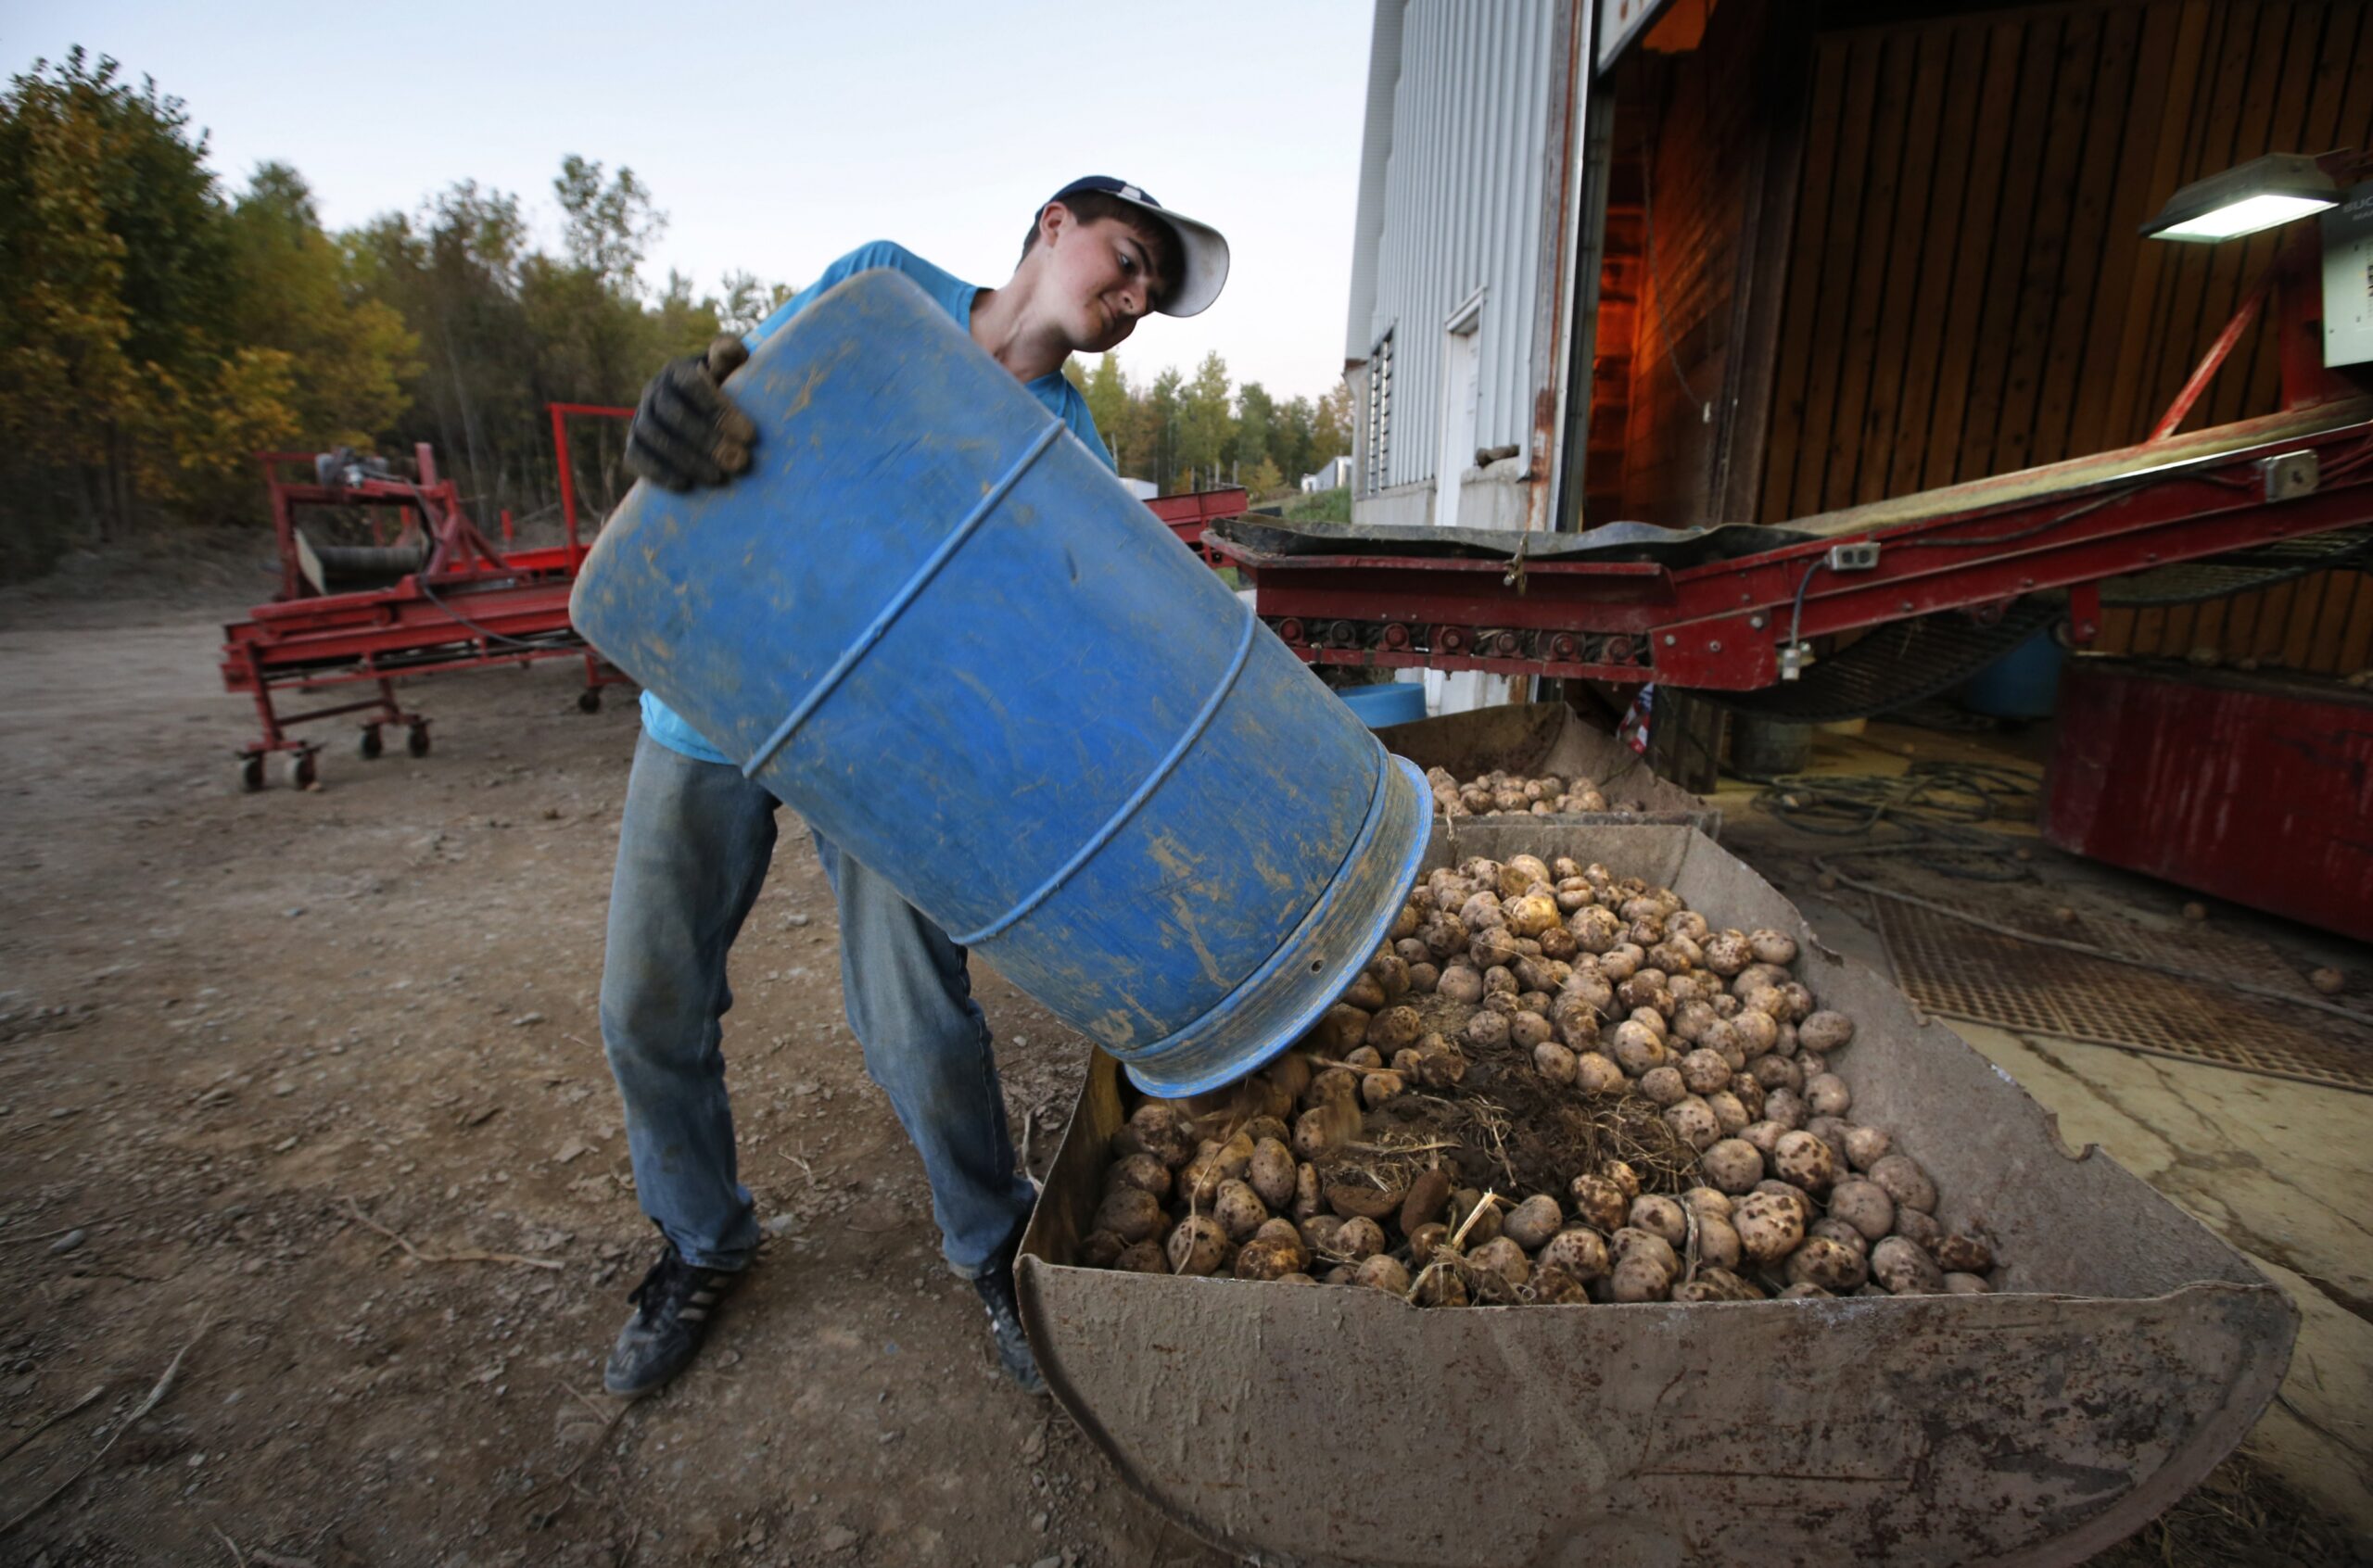 Wisconsin Potato Growers Face New Restrictions To Prevent Crop Disease